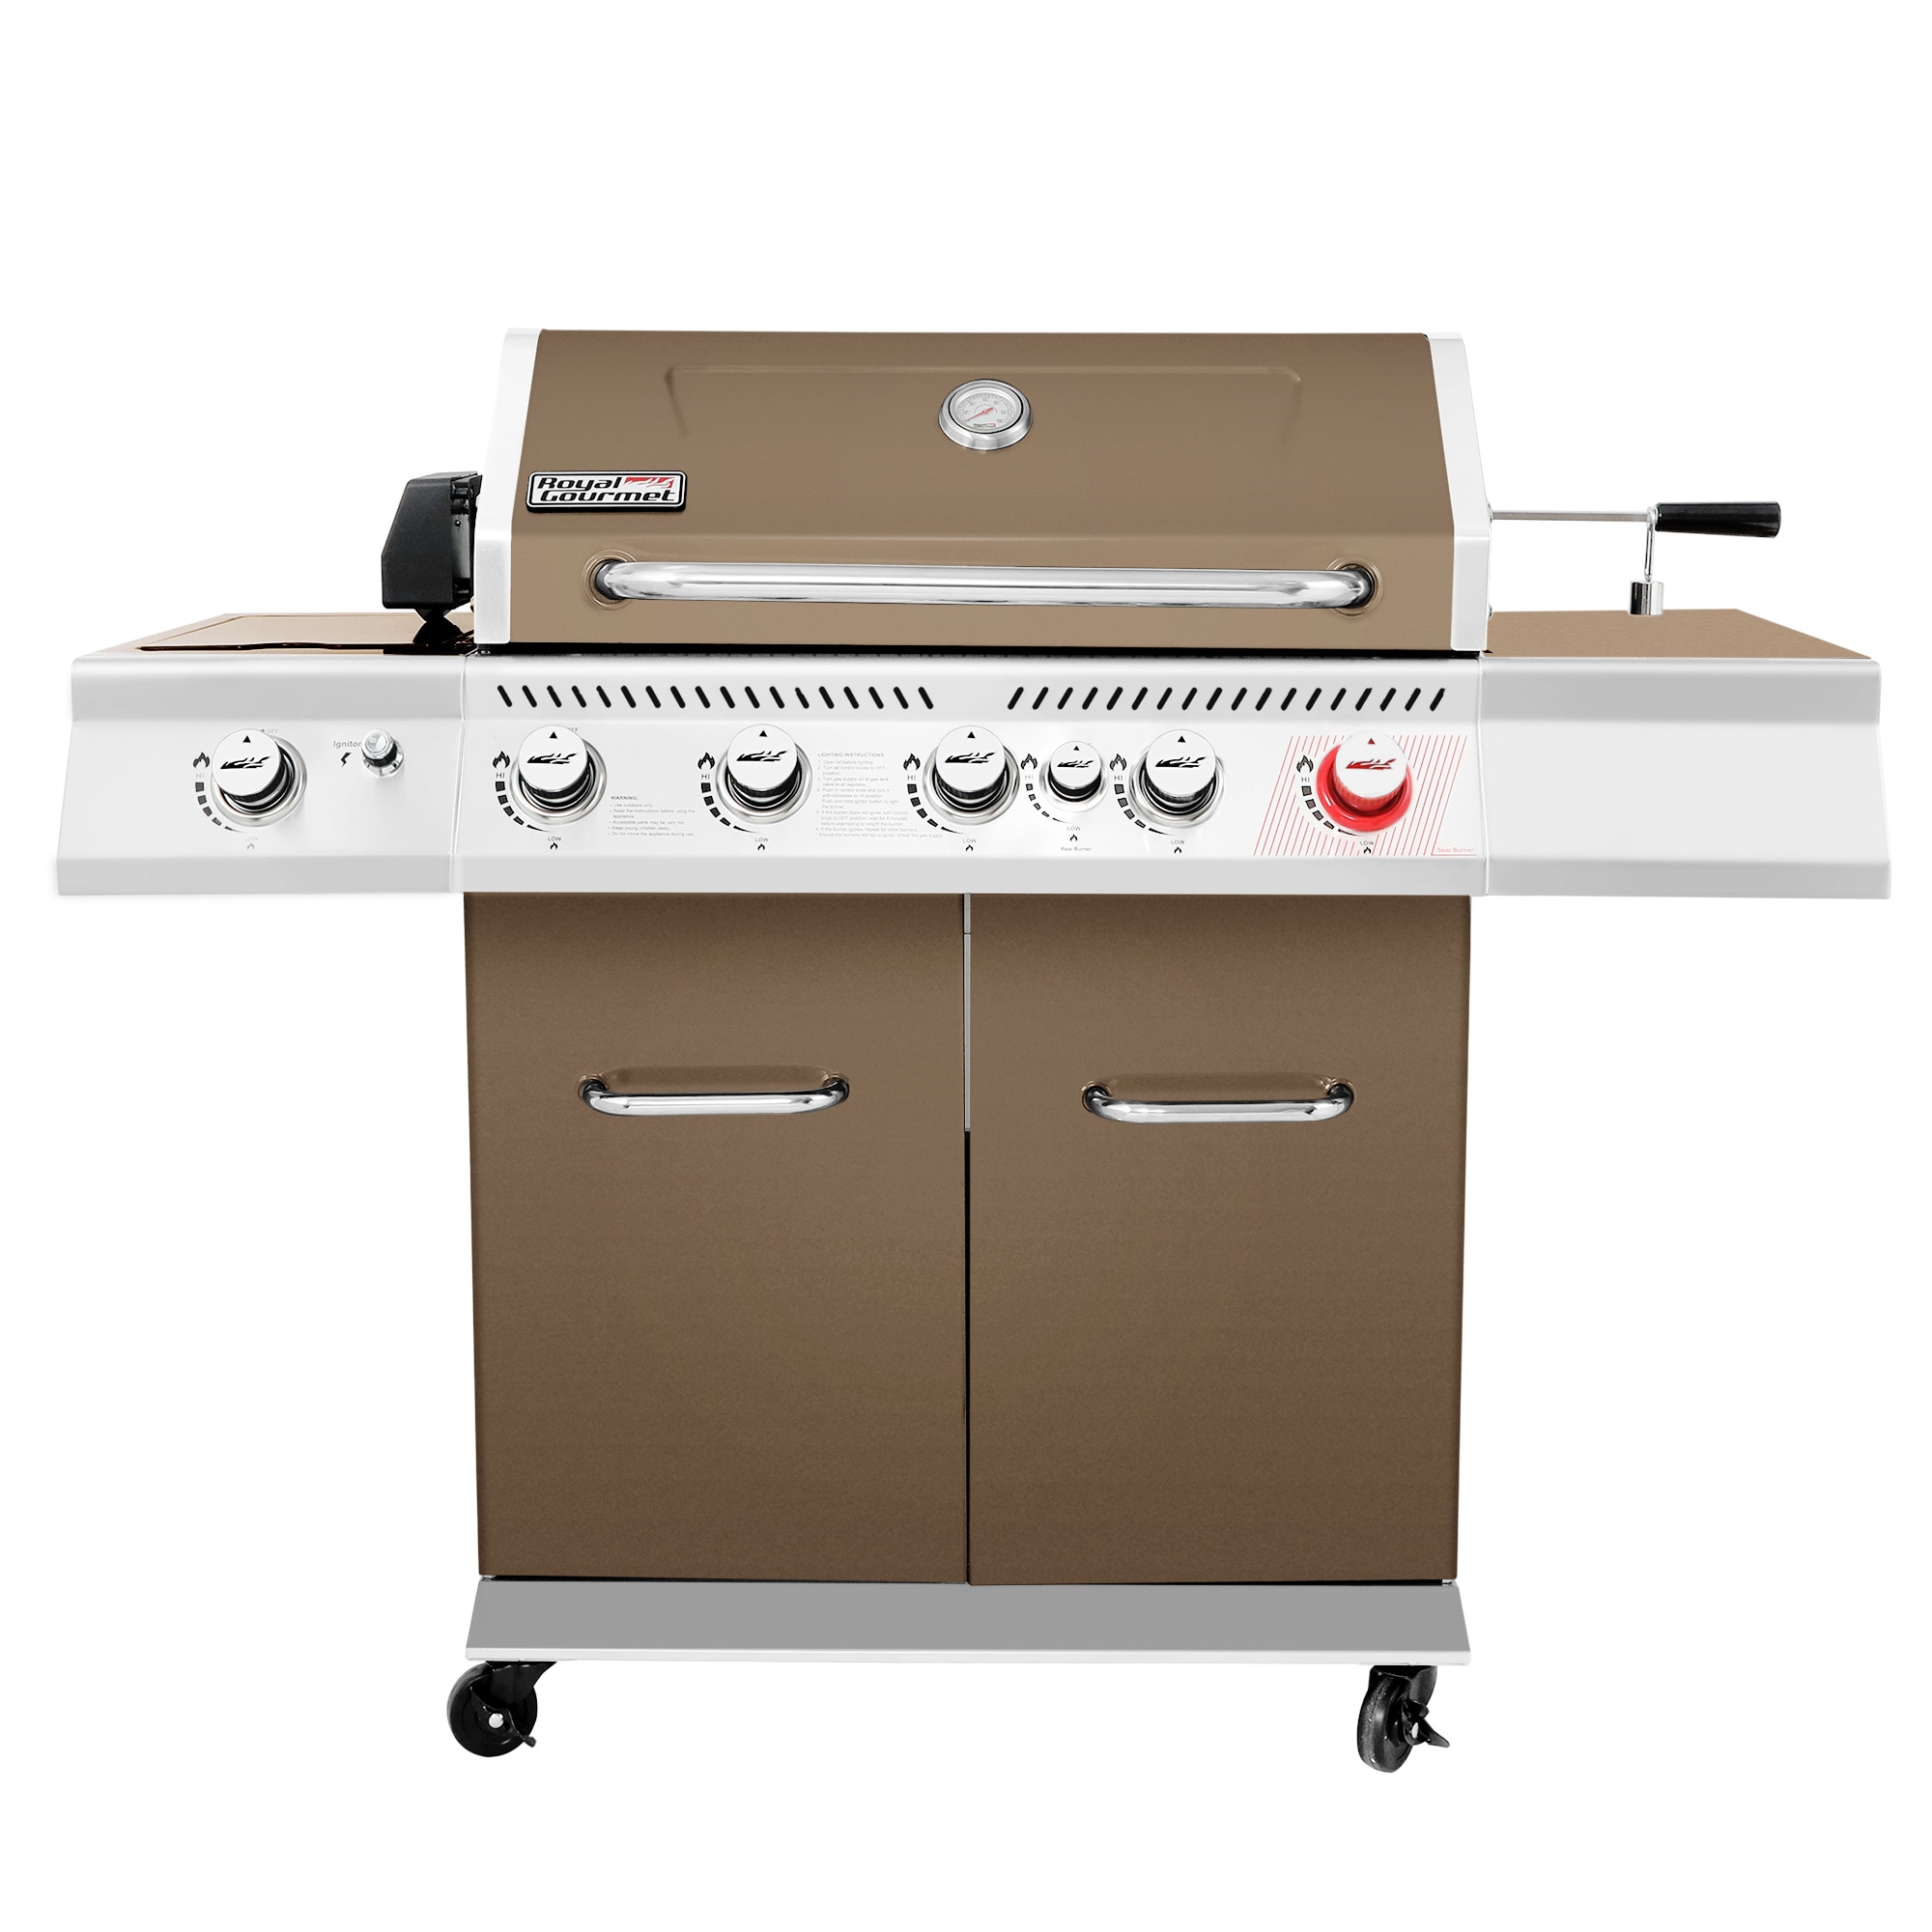 Royal Gourmet 5-Burner Liquid Gas Grill with 1 Side Burner with Rotisserie Burner in the Gas Grills at Lowes.com